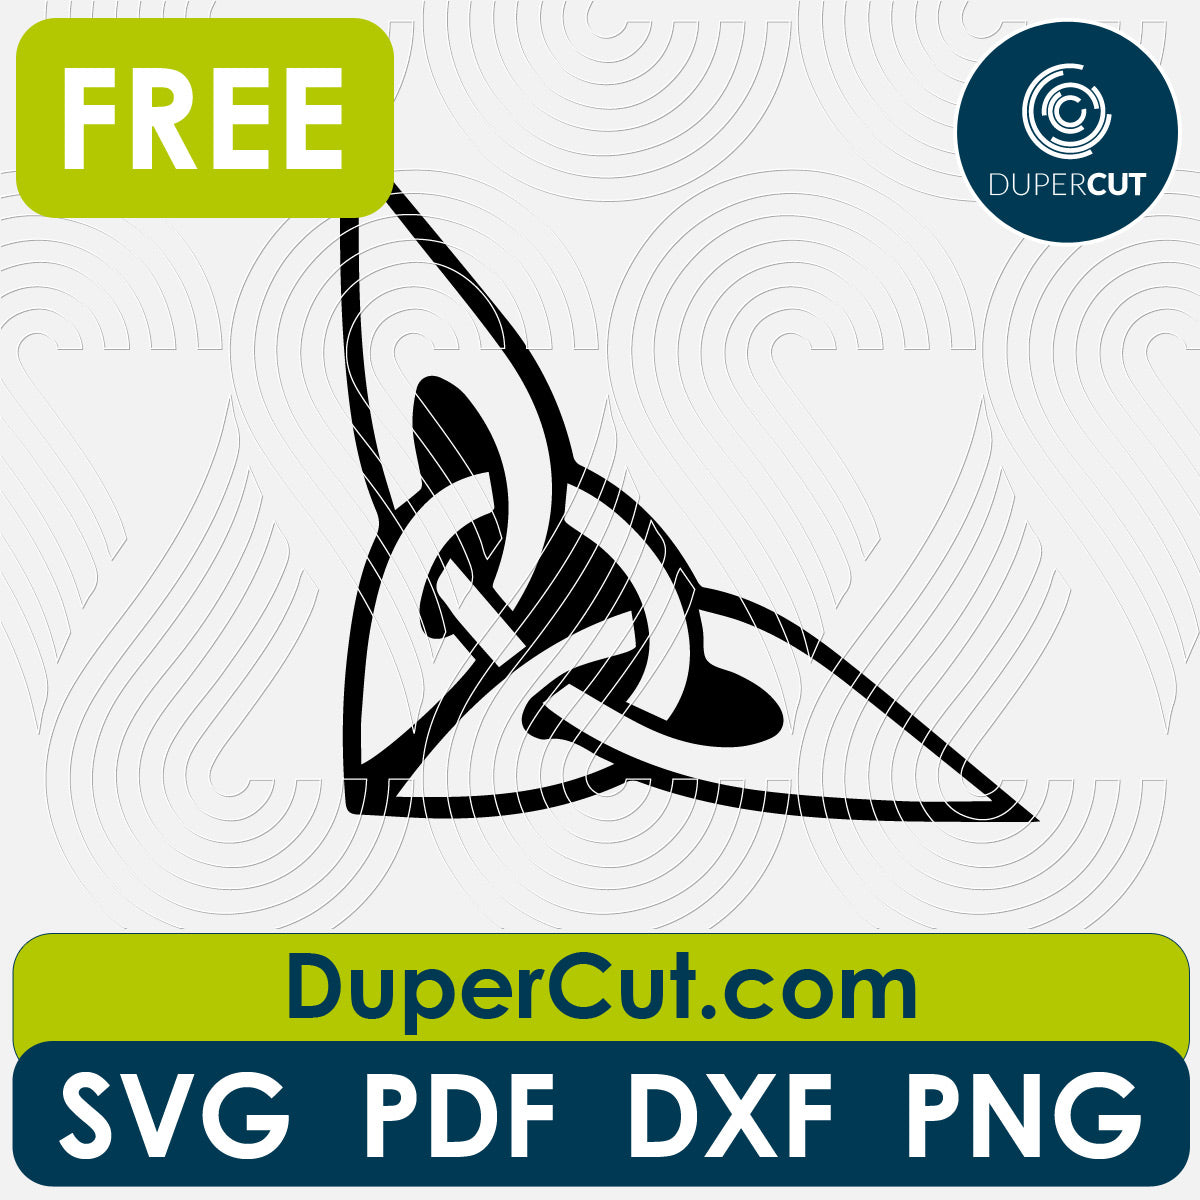 Celtic knot corner design, FREE cutting template SVG PNG DXF files for Glowforge, Cricut, Silhouette, CNC laser router by DuperCut.com